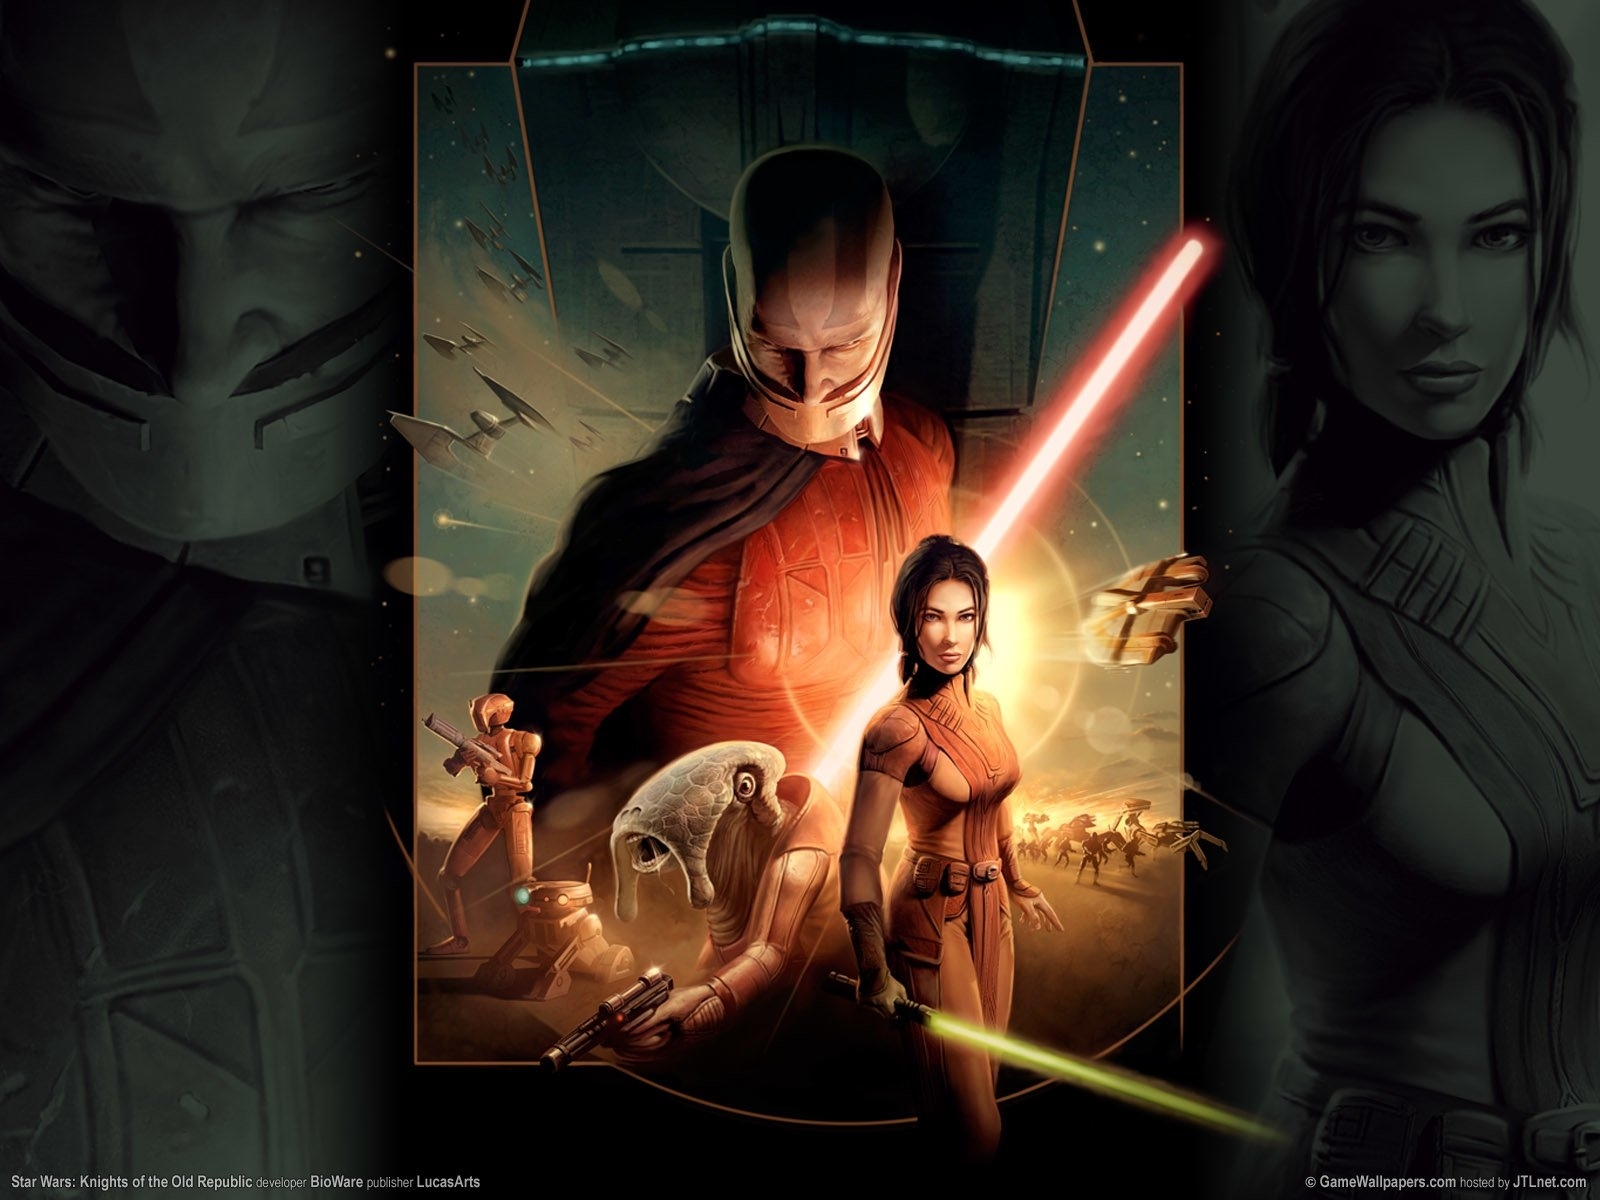 10 New Knights Of The Old Republic Wallpaper FULL HD 1080p For PC Background